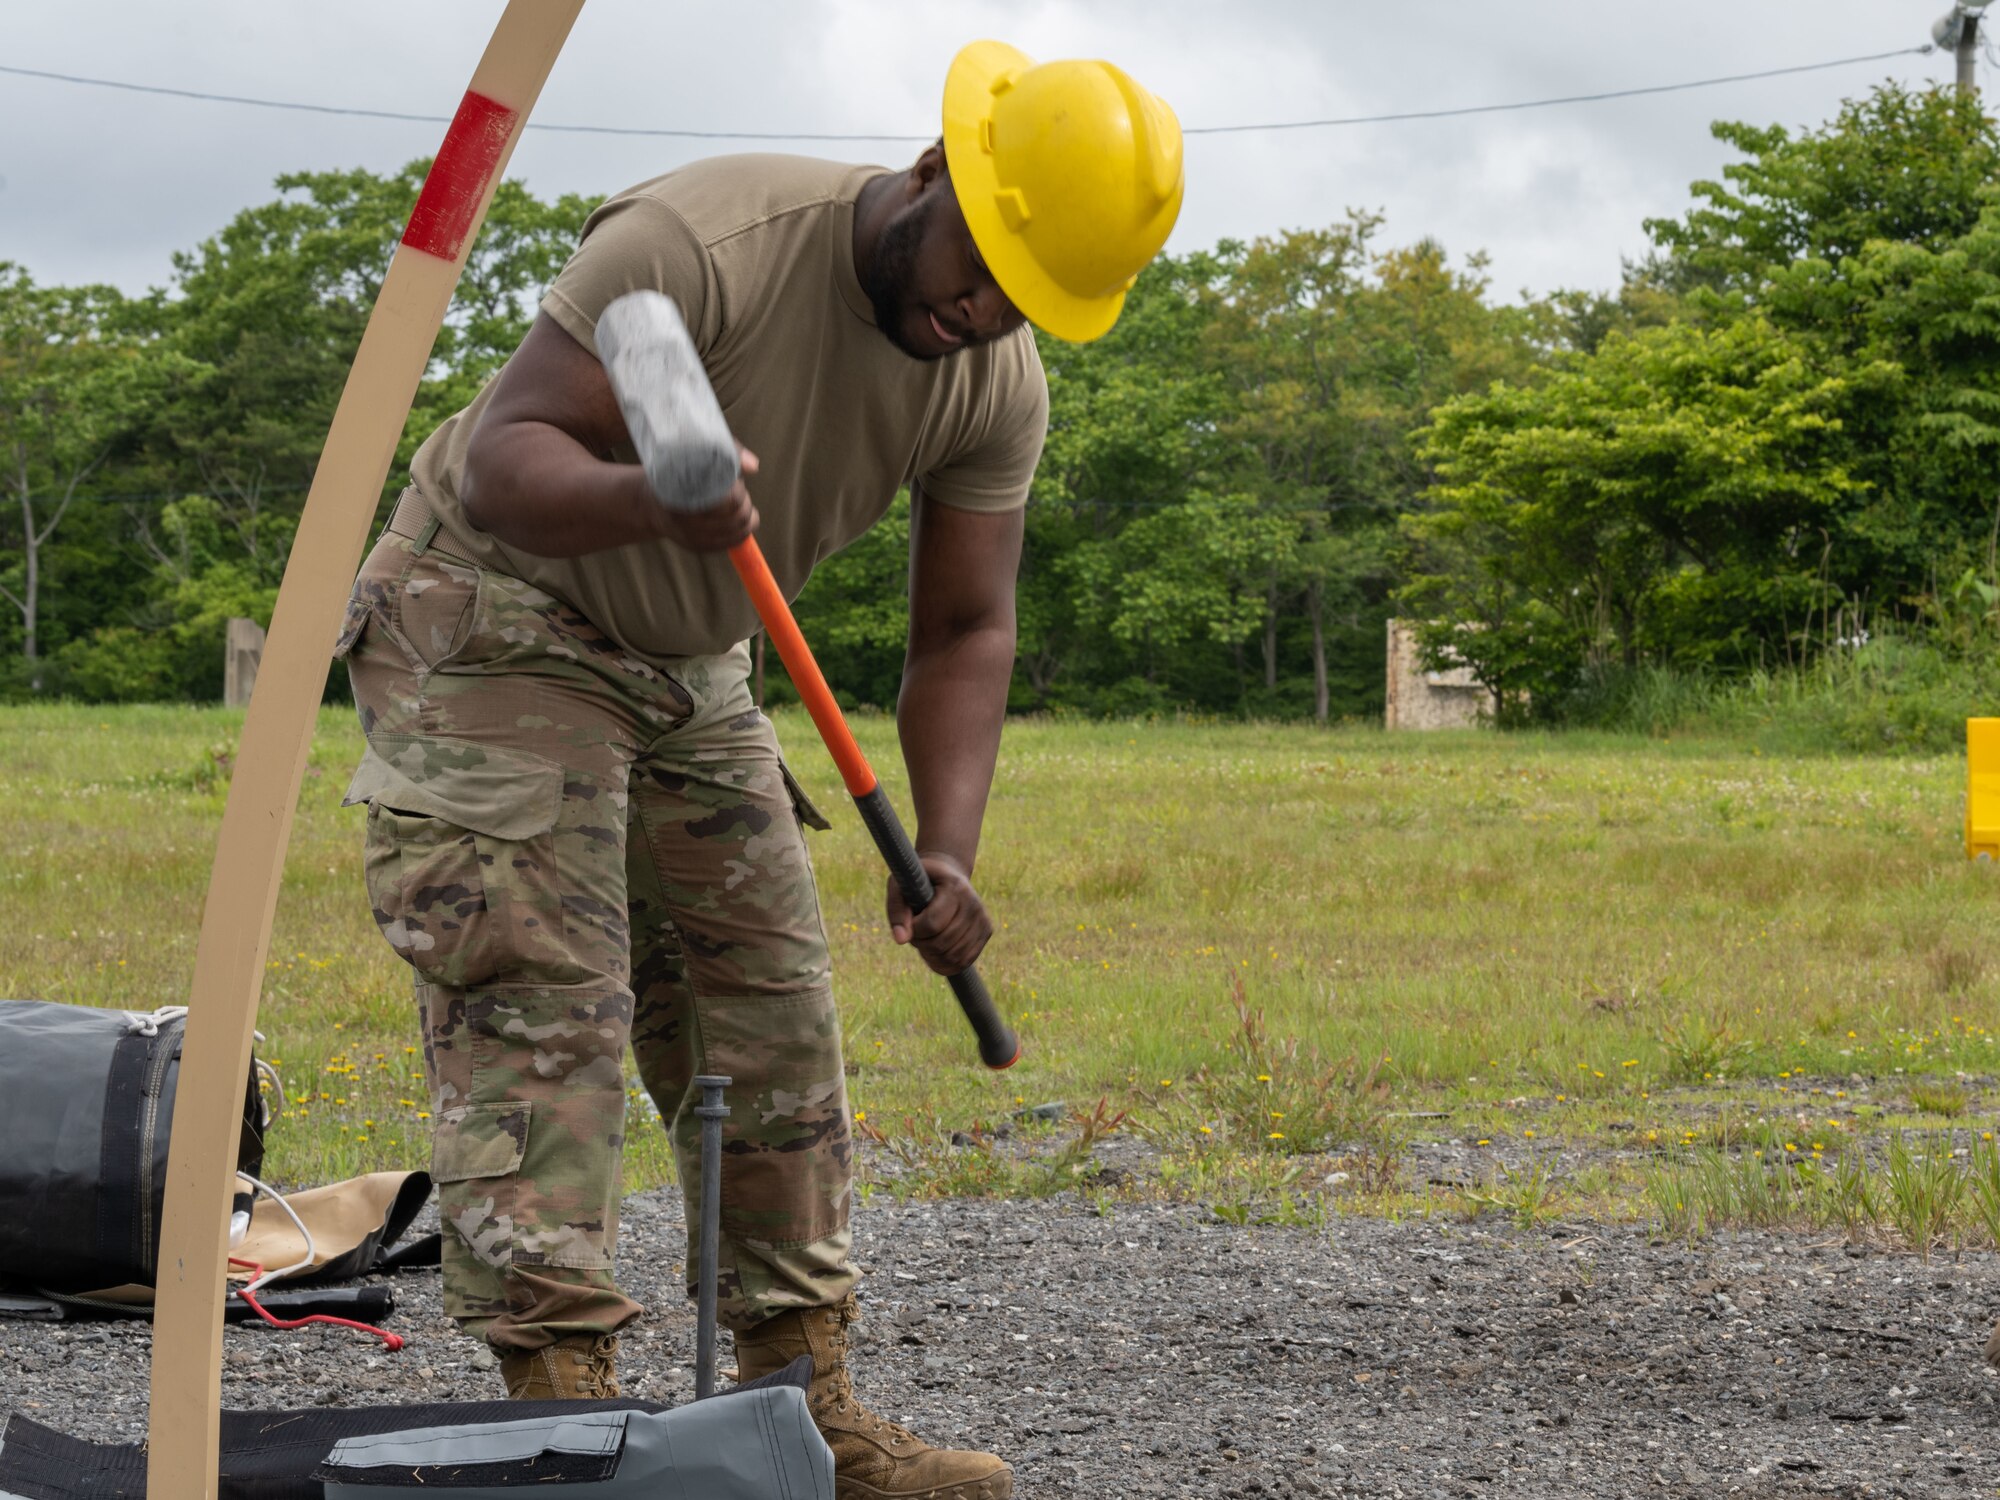 U.S. Airman 1st Class Kyrin Brown, 35th Civil Engineer Squadron water and fuels system maintainer, stakes a Disaster Relief Beddown System (DRBS) tent down during the annual Prime Base Engineer Emergency Force training at Misawa Air Base, Japan, June 14, 2022.